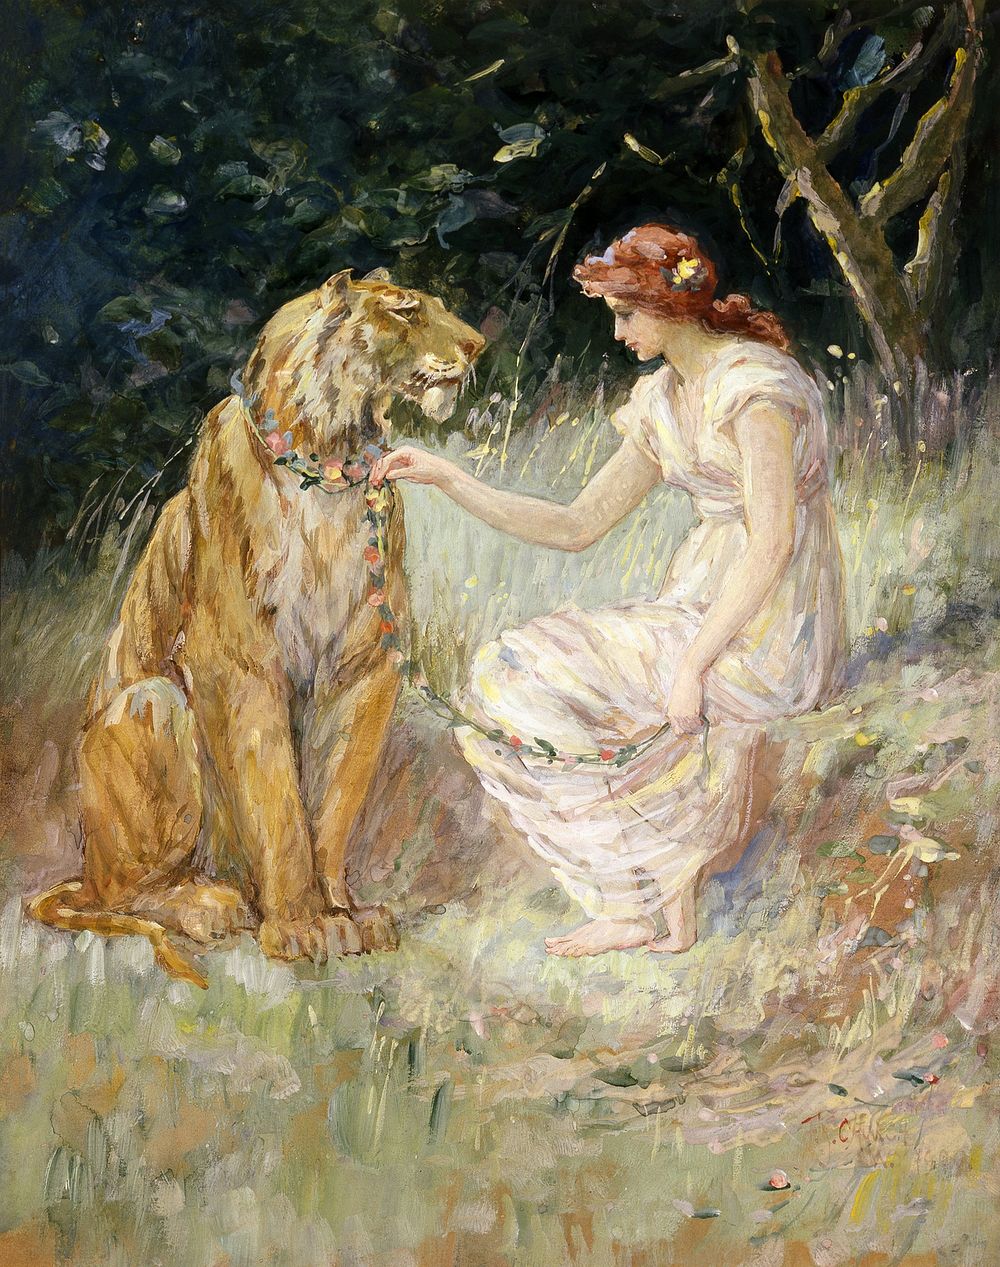 Lady and the Tiger (1900) vintage painting by Frederick Stuart Church. Original public domain image from The Smithsonian…